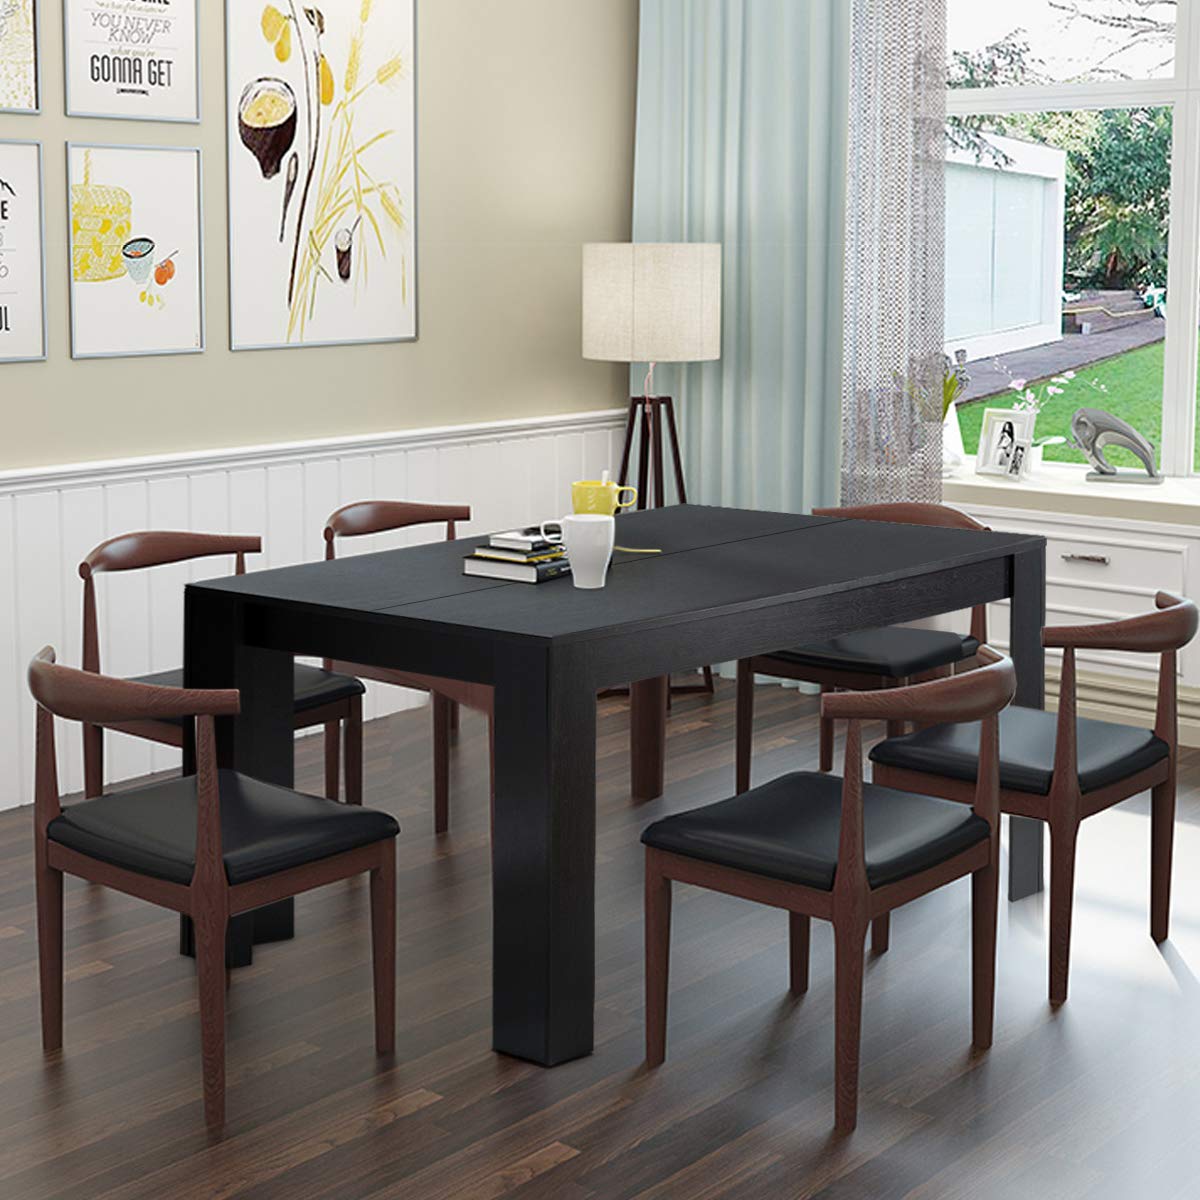 Giantex Dining Table for 6-8, Wood Rectangular Table, 63" L x 31.5" W x 30" H Large Farmhouse Center Table